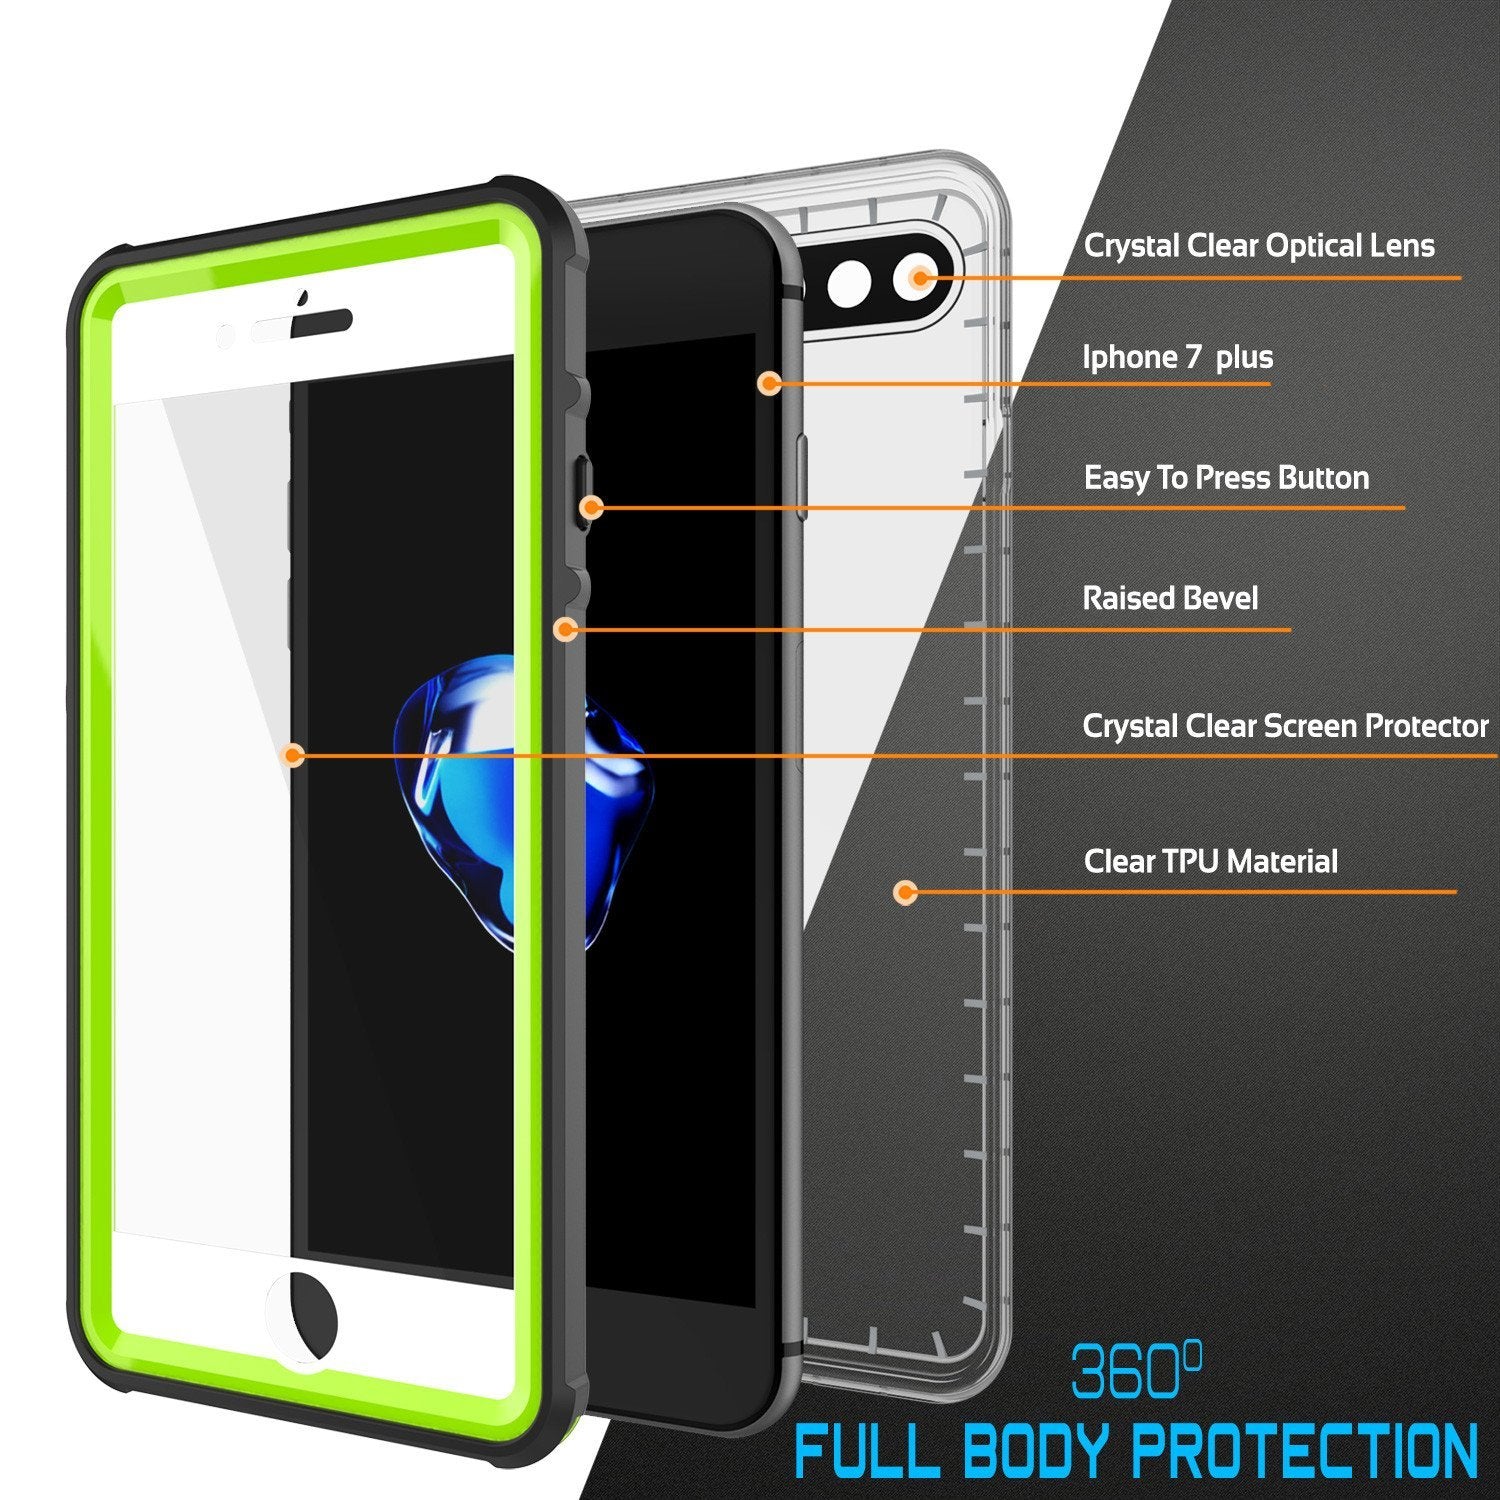 iPhone 8+ Plus Waterproof Case, PUNKcase CRYSTAL Light Green  W/ Attached Screen Protector  | Warranty - PunkCase NZ